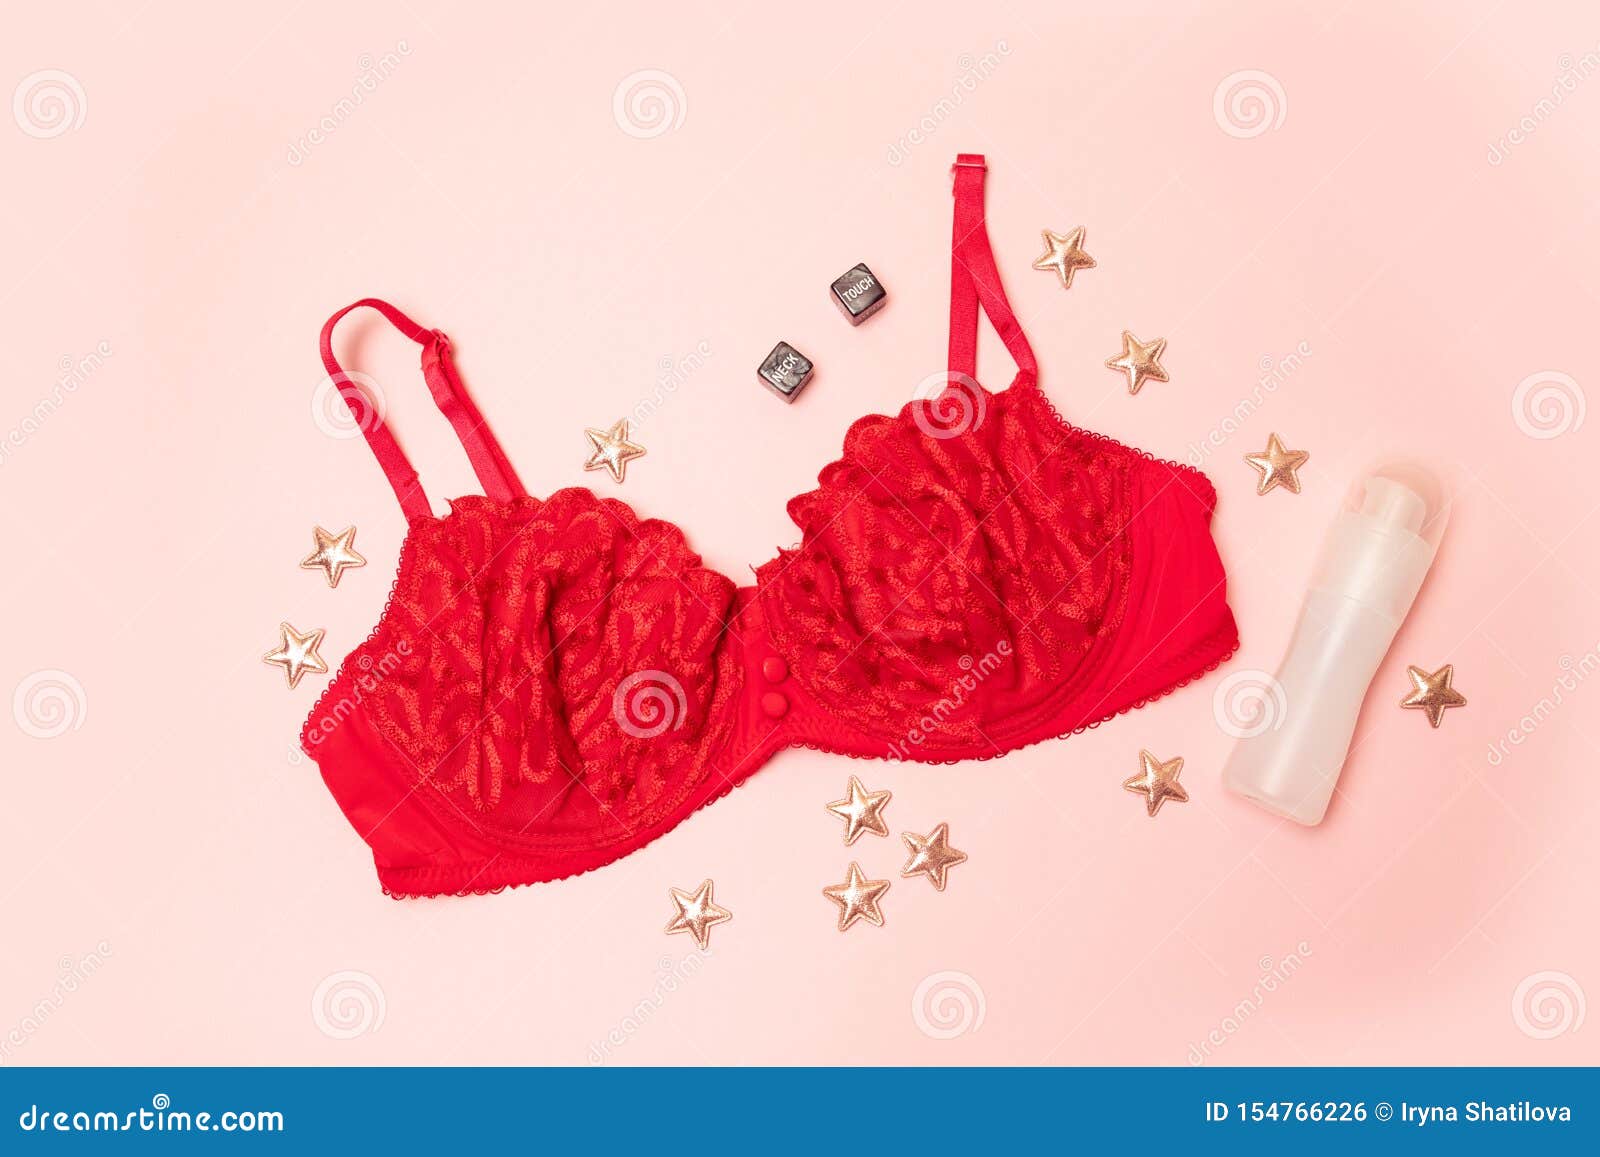 Red Bra with Lace. Star Decor, Lubricant on a White Background. the  Apartment Was Lying. Fashion Lingerie Concept Stock Photo - Image of love,  color: 154766226